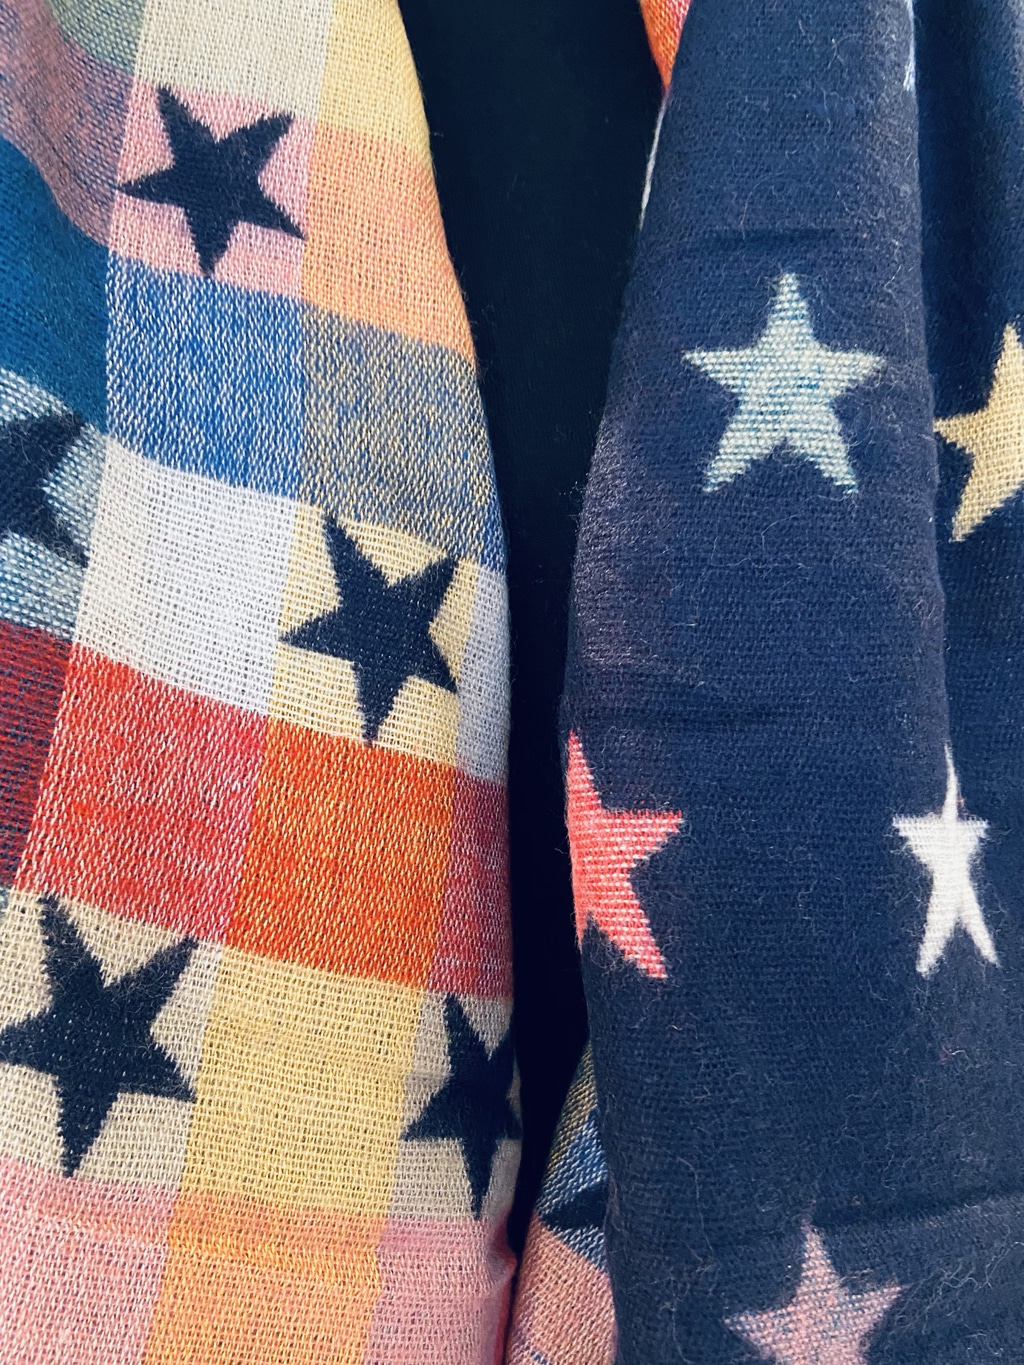 navy and pattern star scarf close